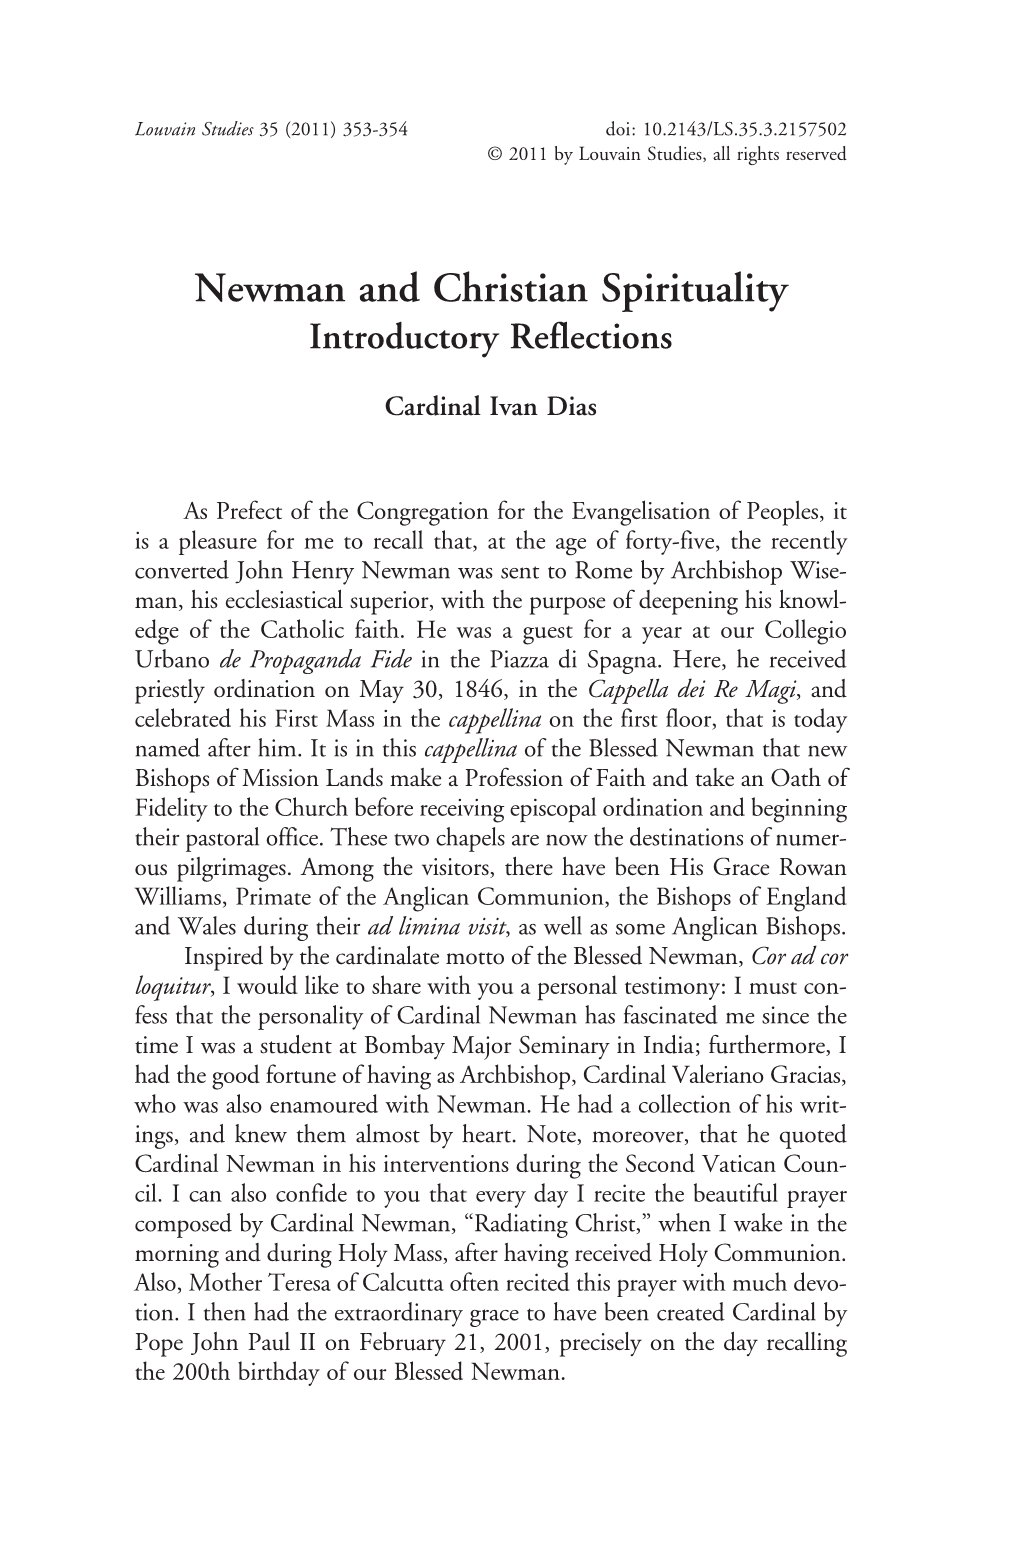 Newman and Christian Spirituality Introductory Reflections